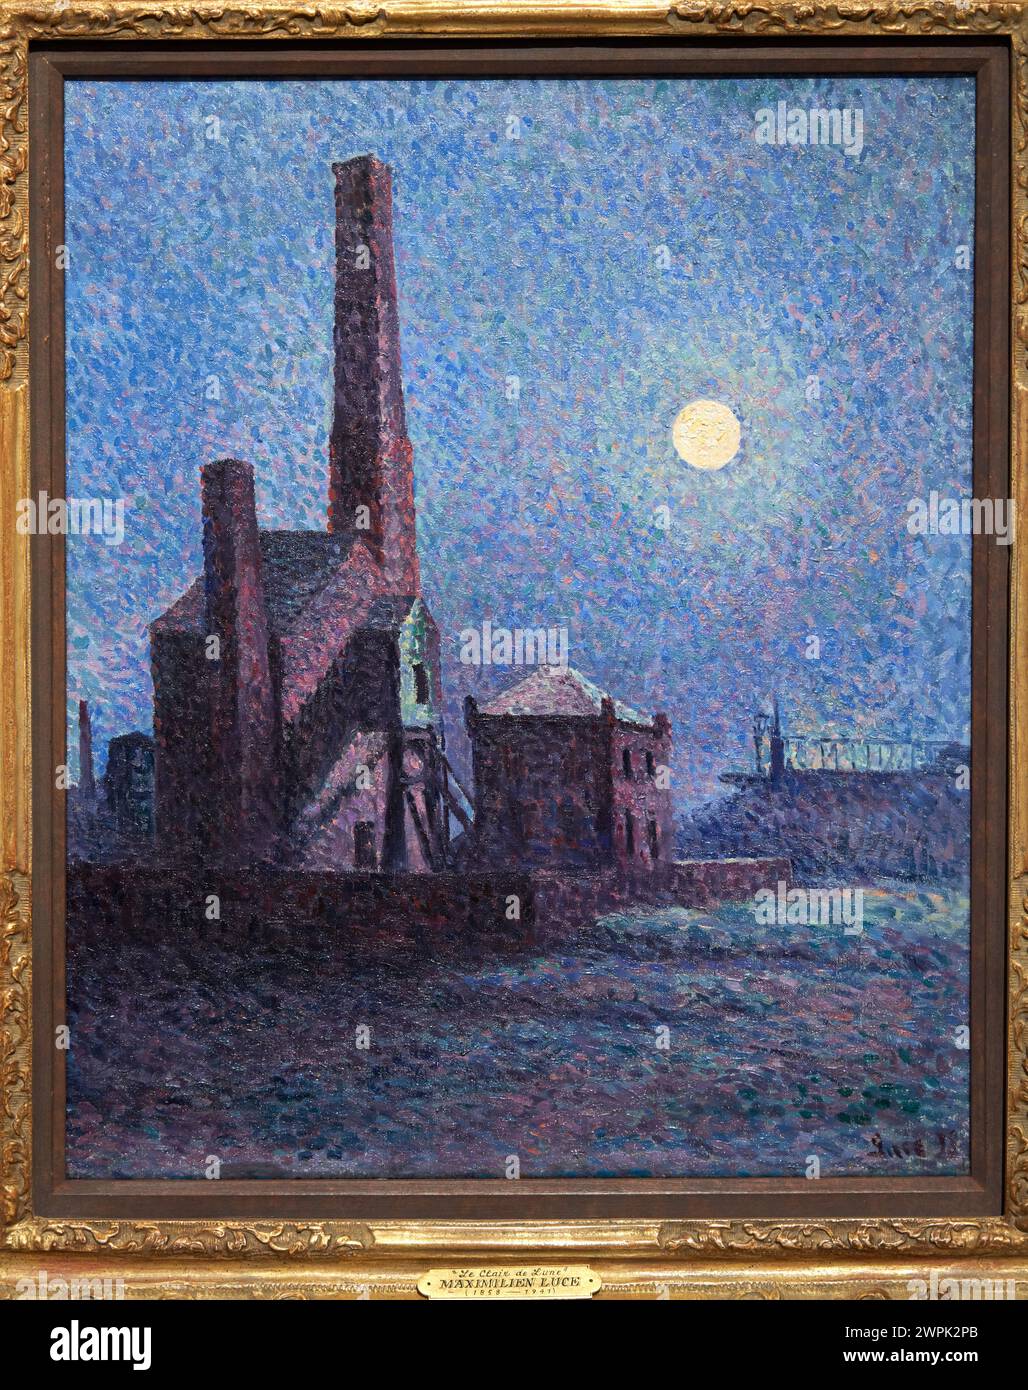 Maximilien Luce, (1858-1941), Factory in the Moonlight, 1898 Stock Photo